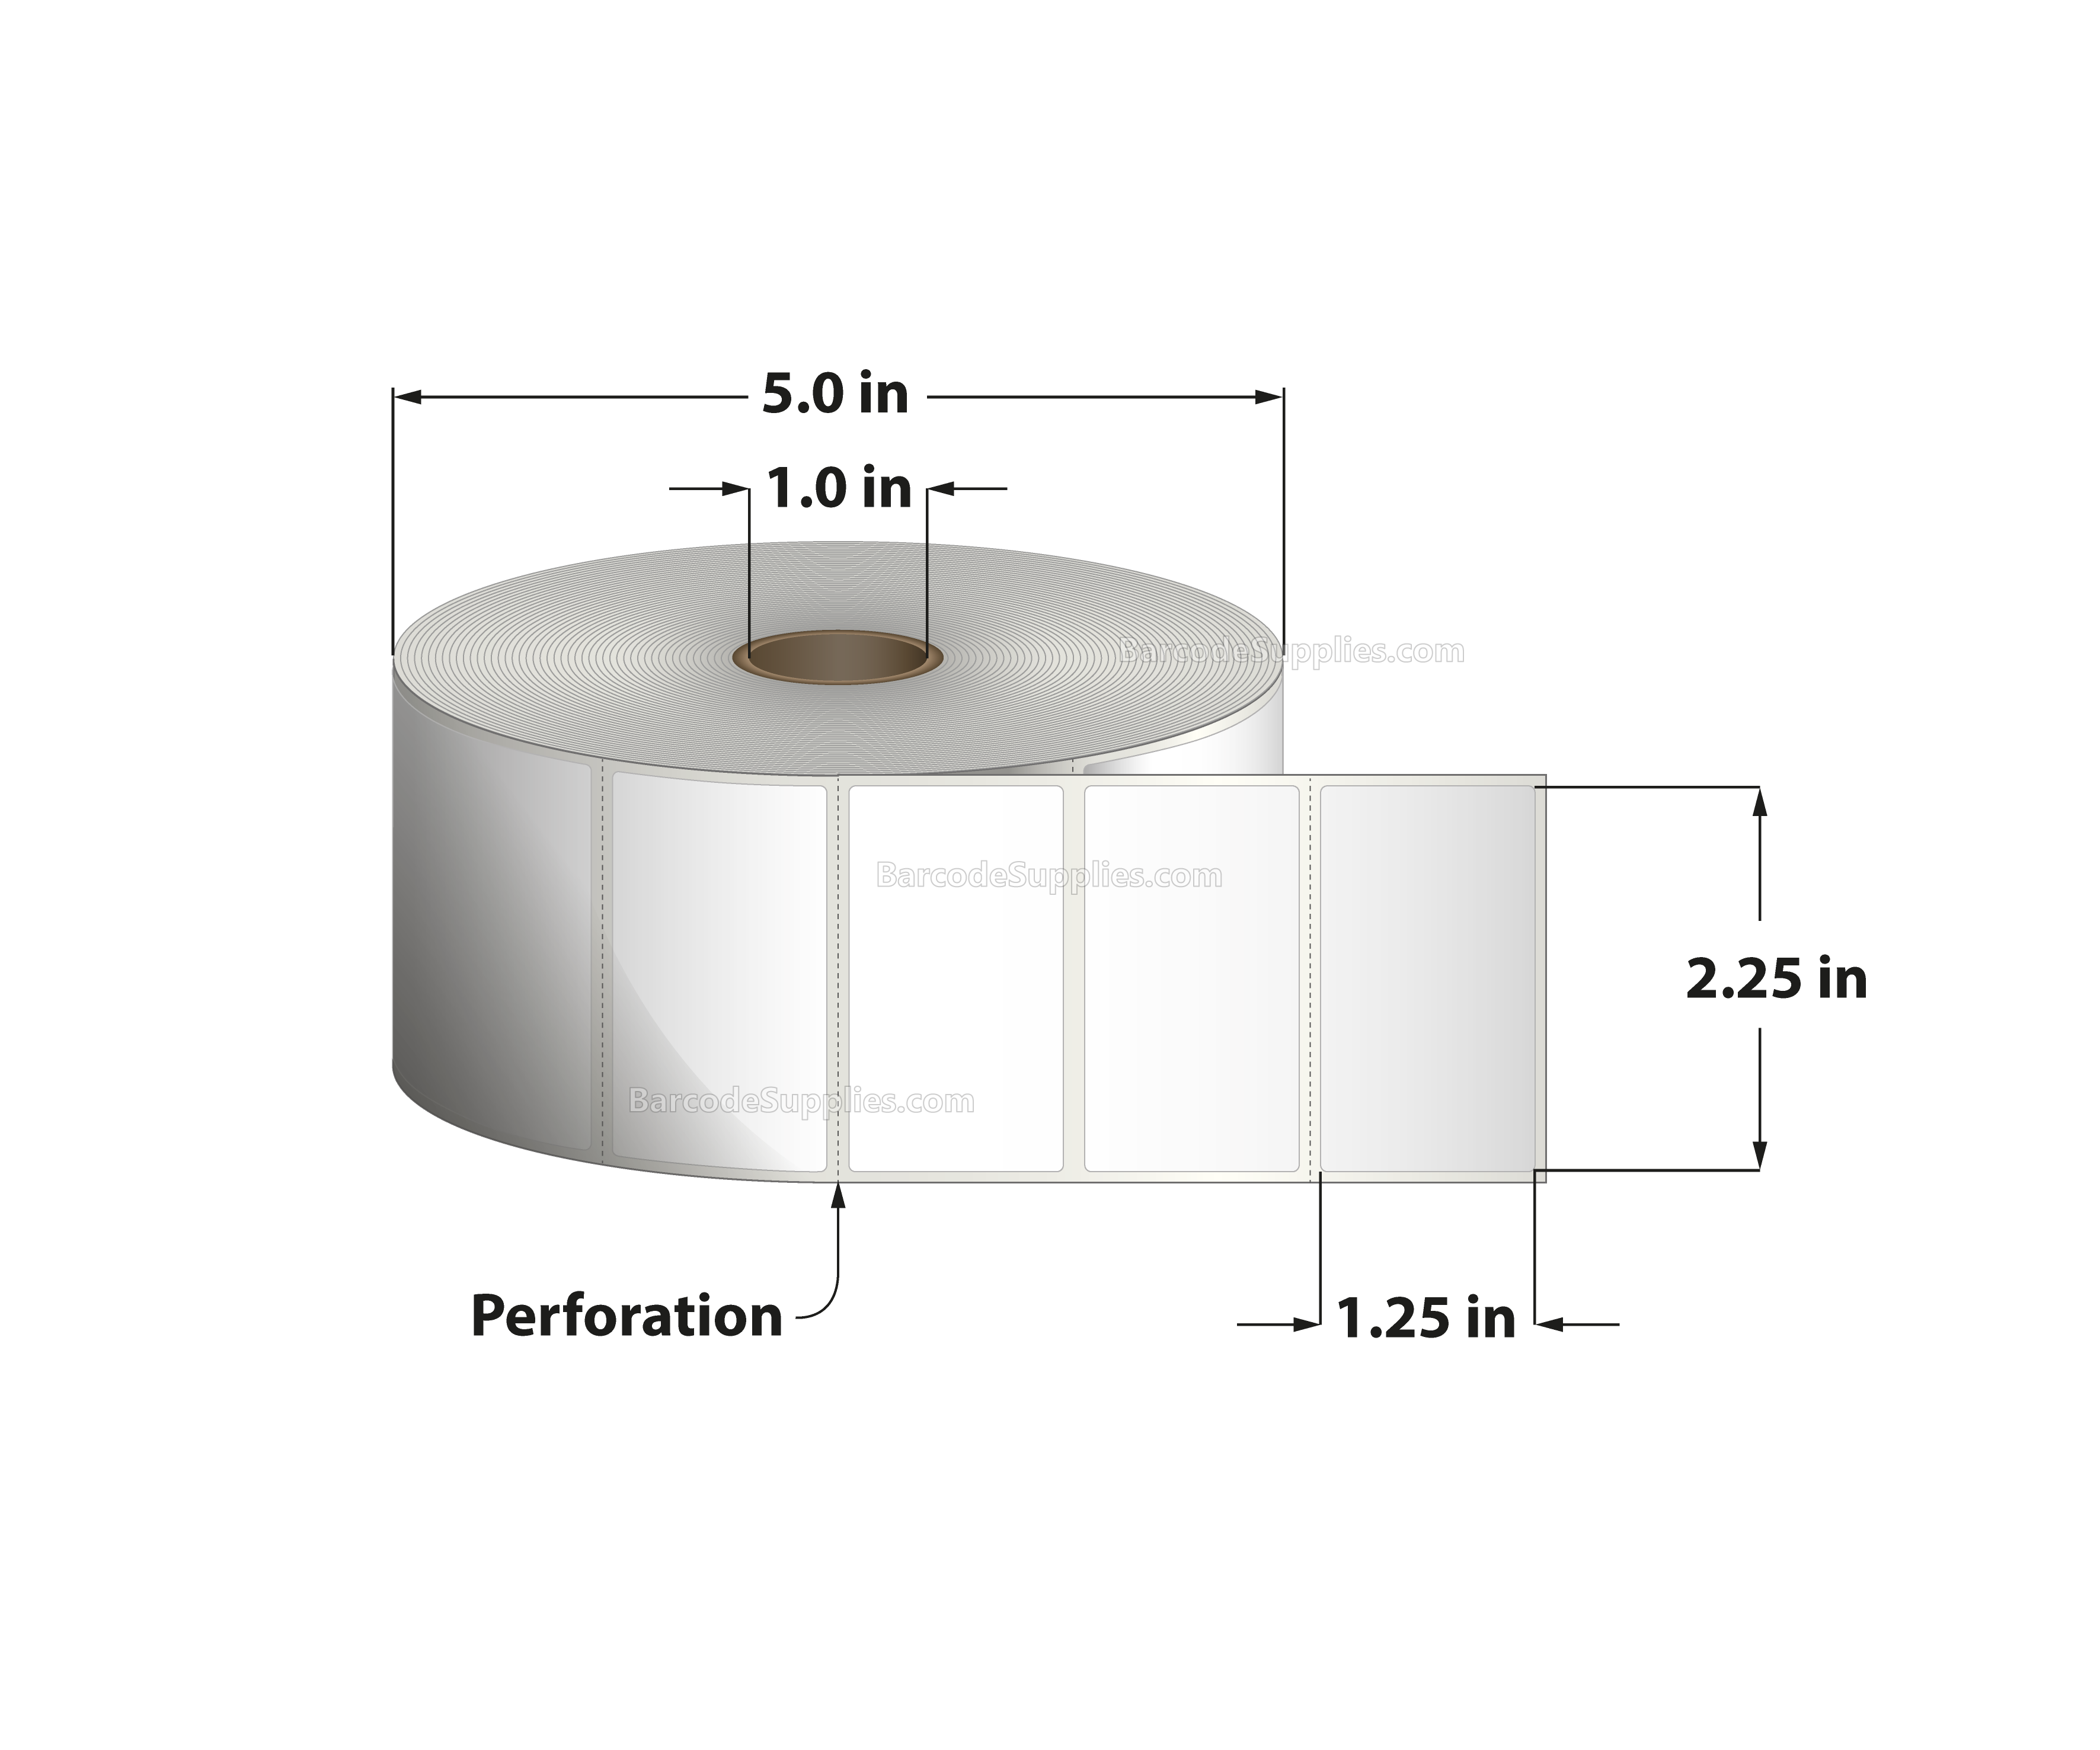 2.25 x 1.25 Direct Thermal White Labels With Acrylic Adhesive - Perforated - 2100 Labels Per Roll - Carton Of 12 Rolls - 25200 Labels Total - MPN: RD-225-125-2100-1 - BarcodeSource, Inc.